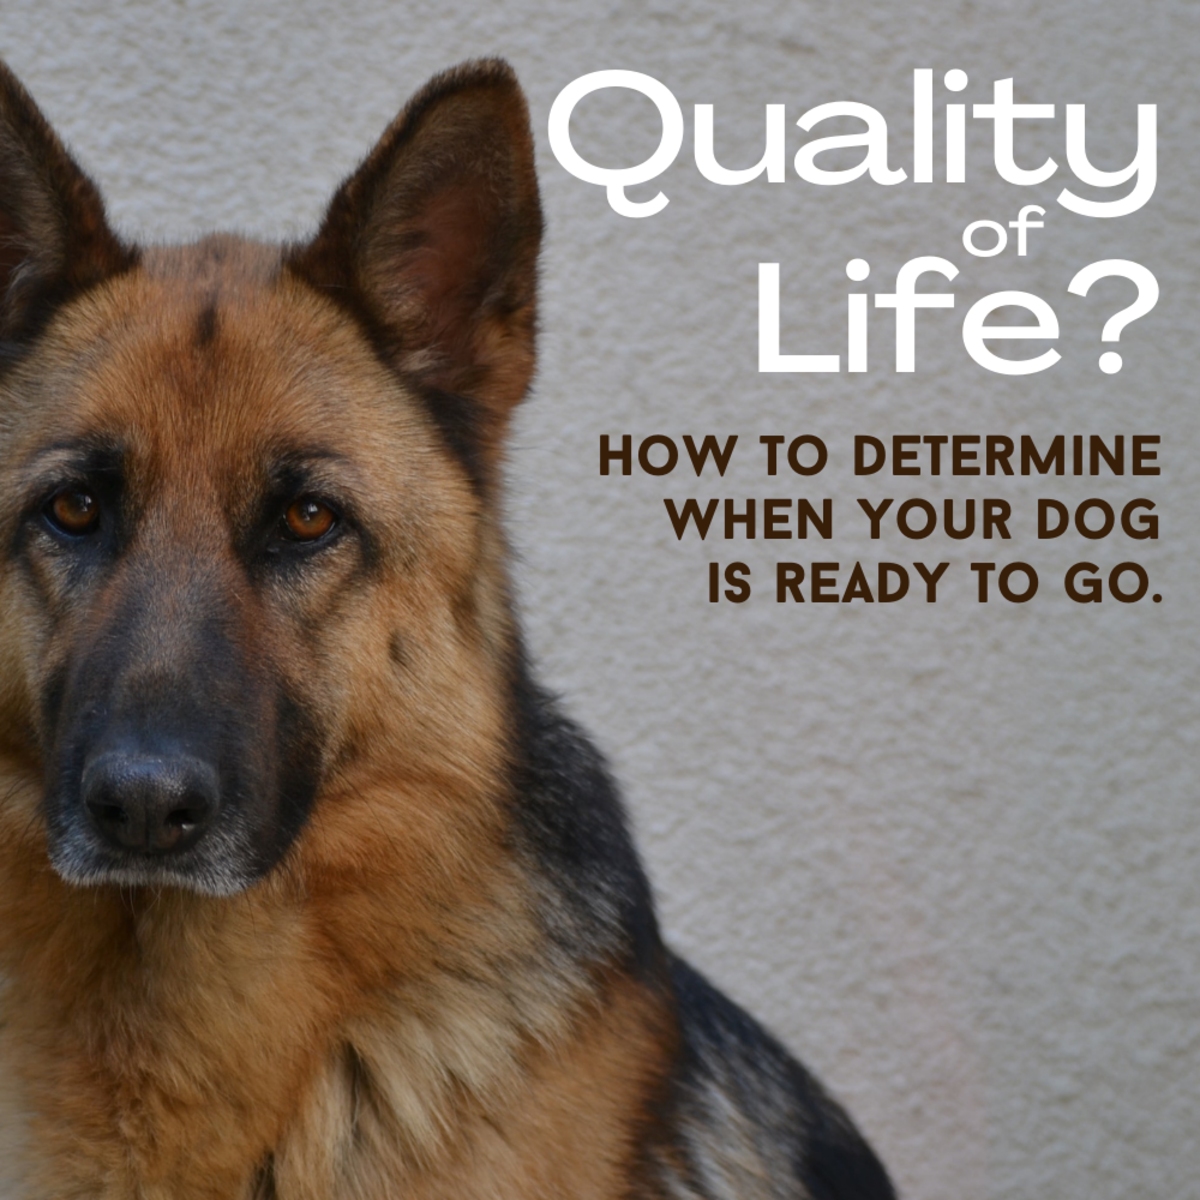 How to Determine a Dog's Quality of Life - PetHelpful